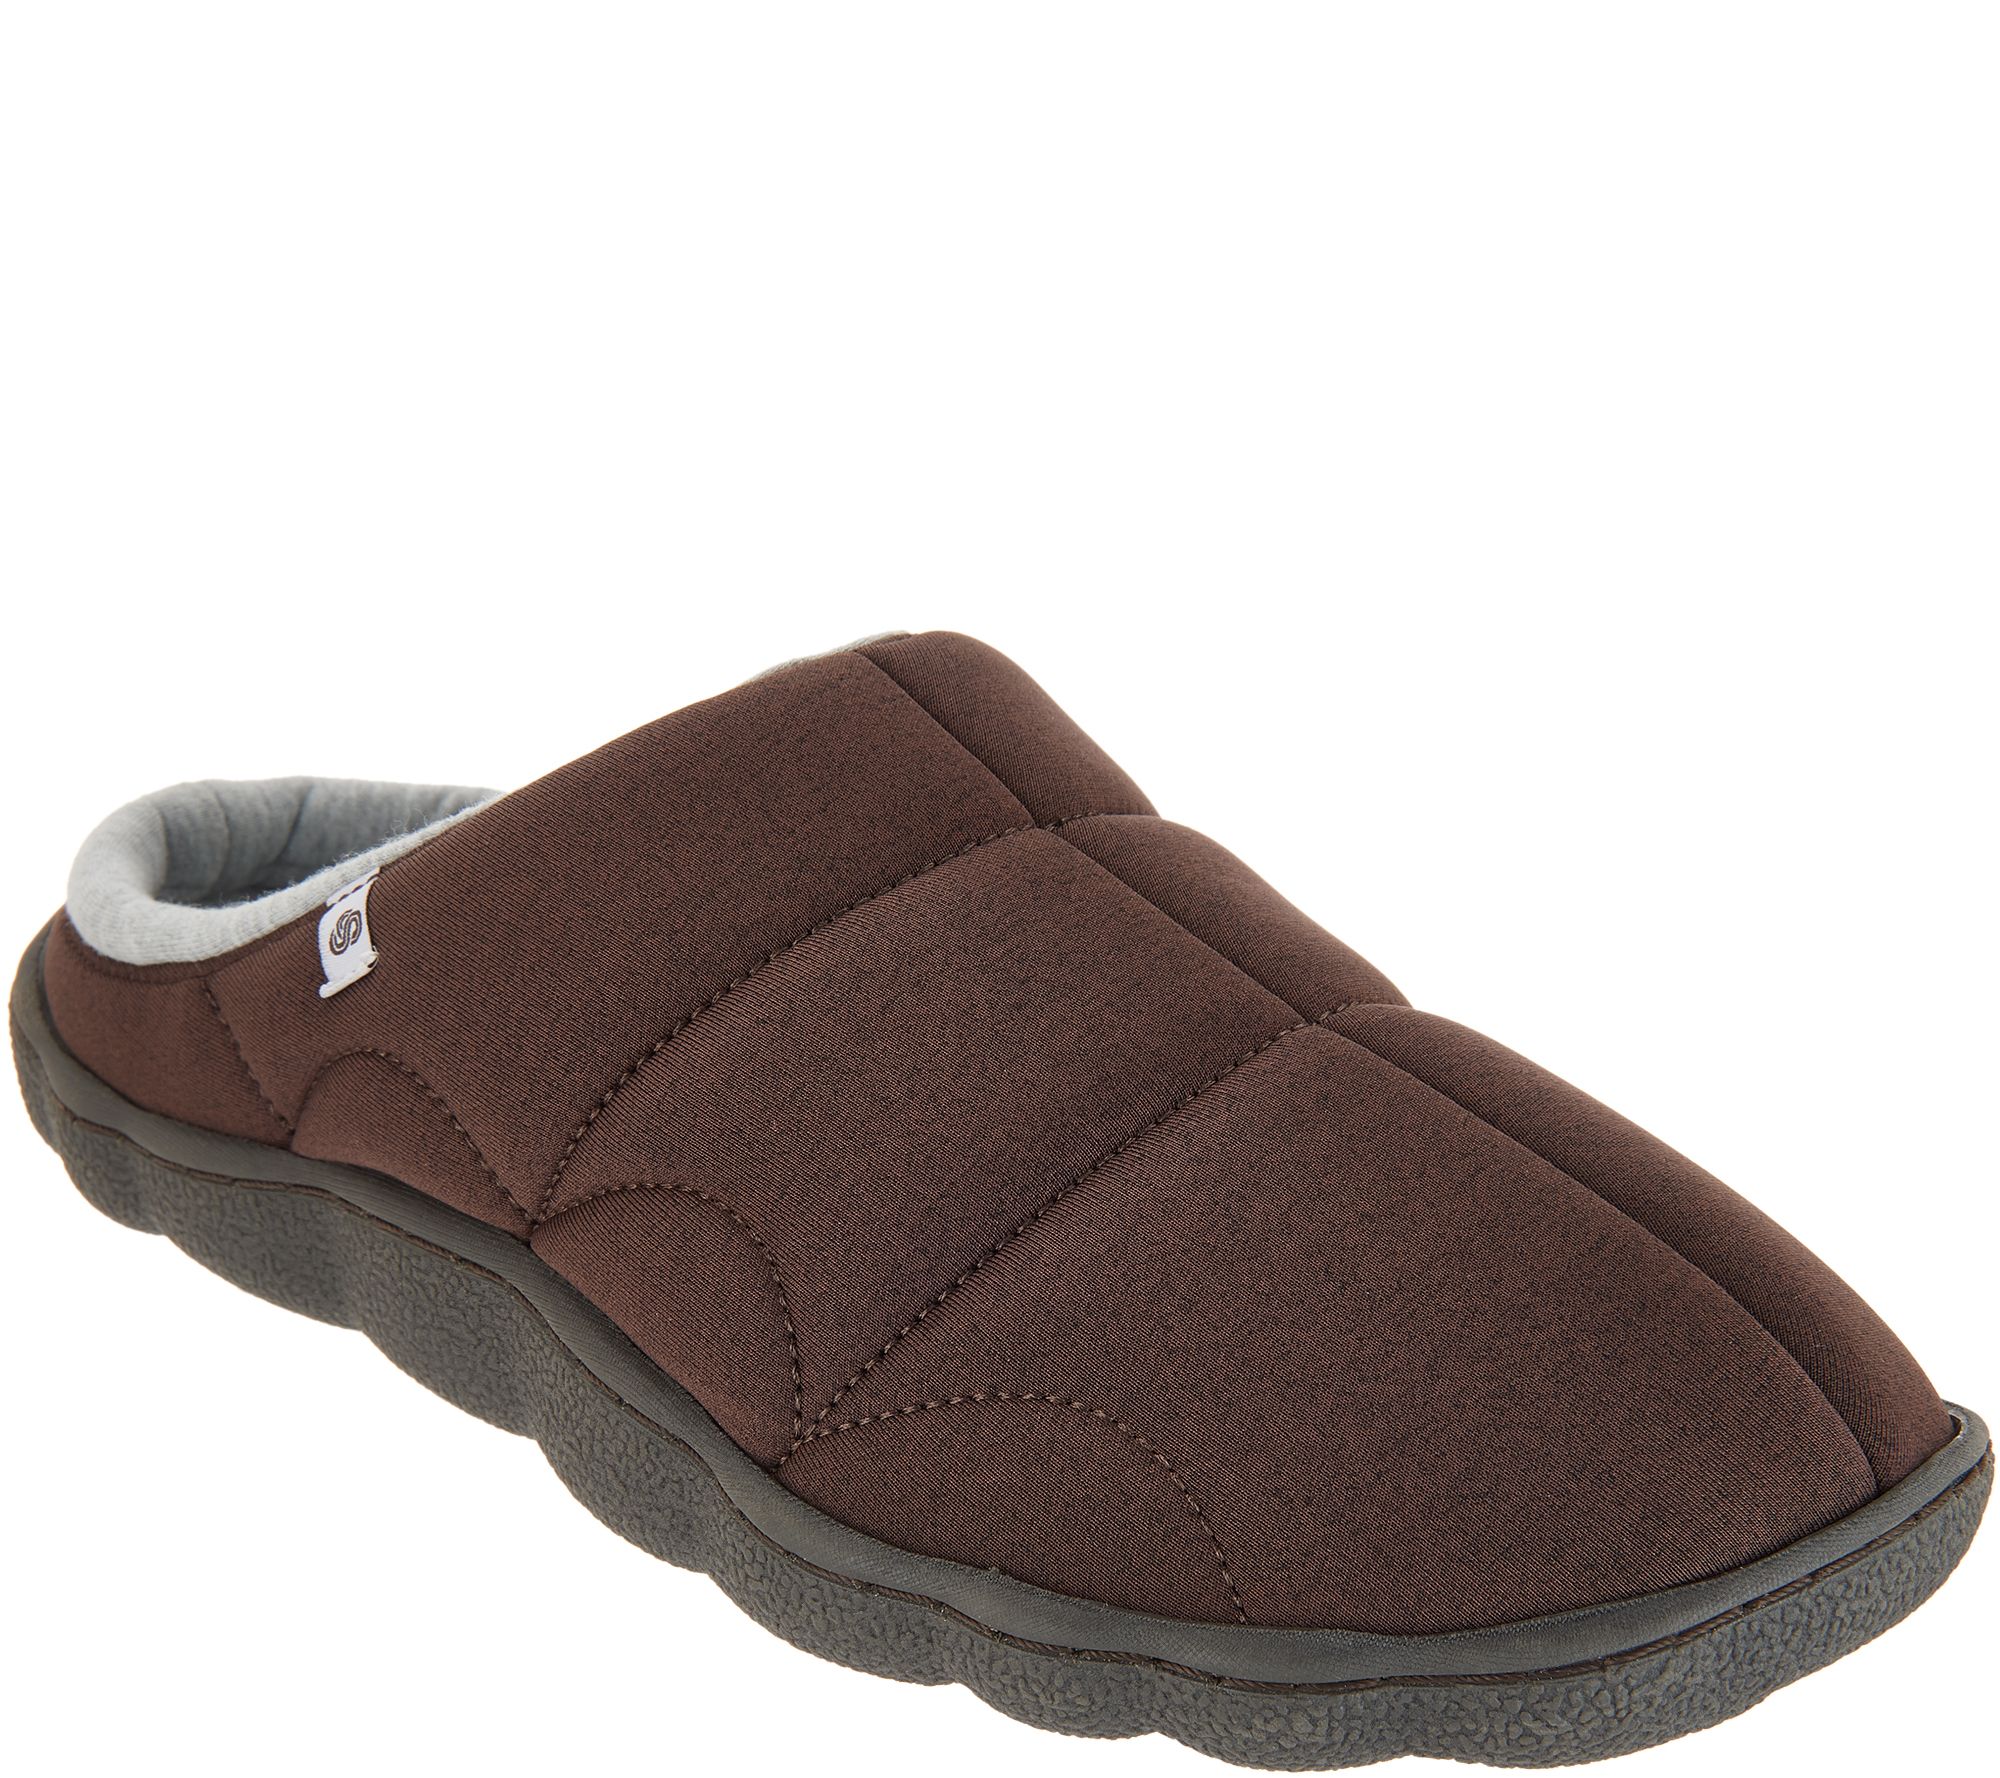 cloudsteppers by clarks mens